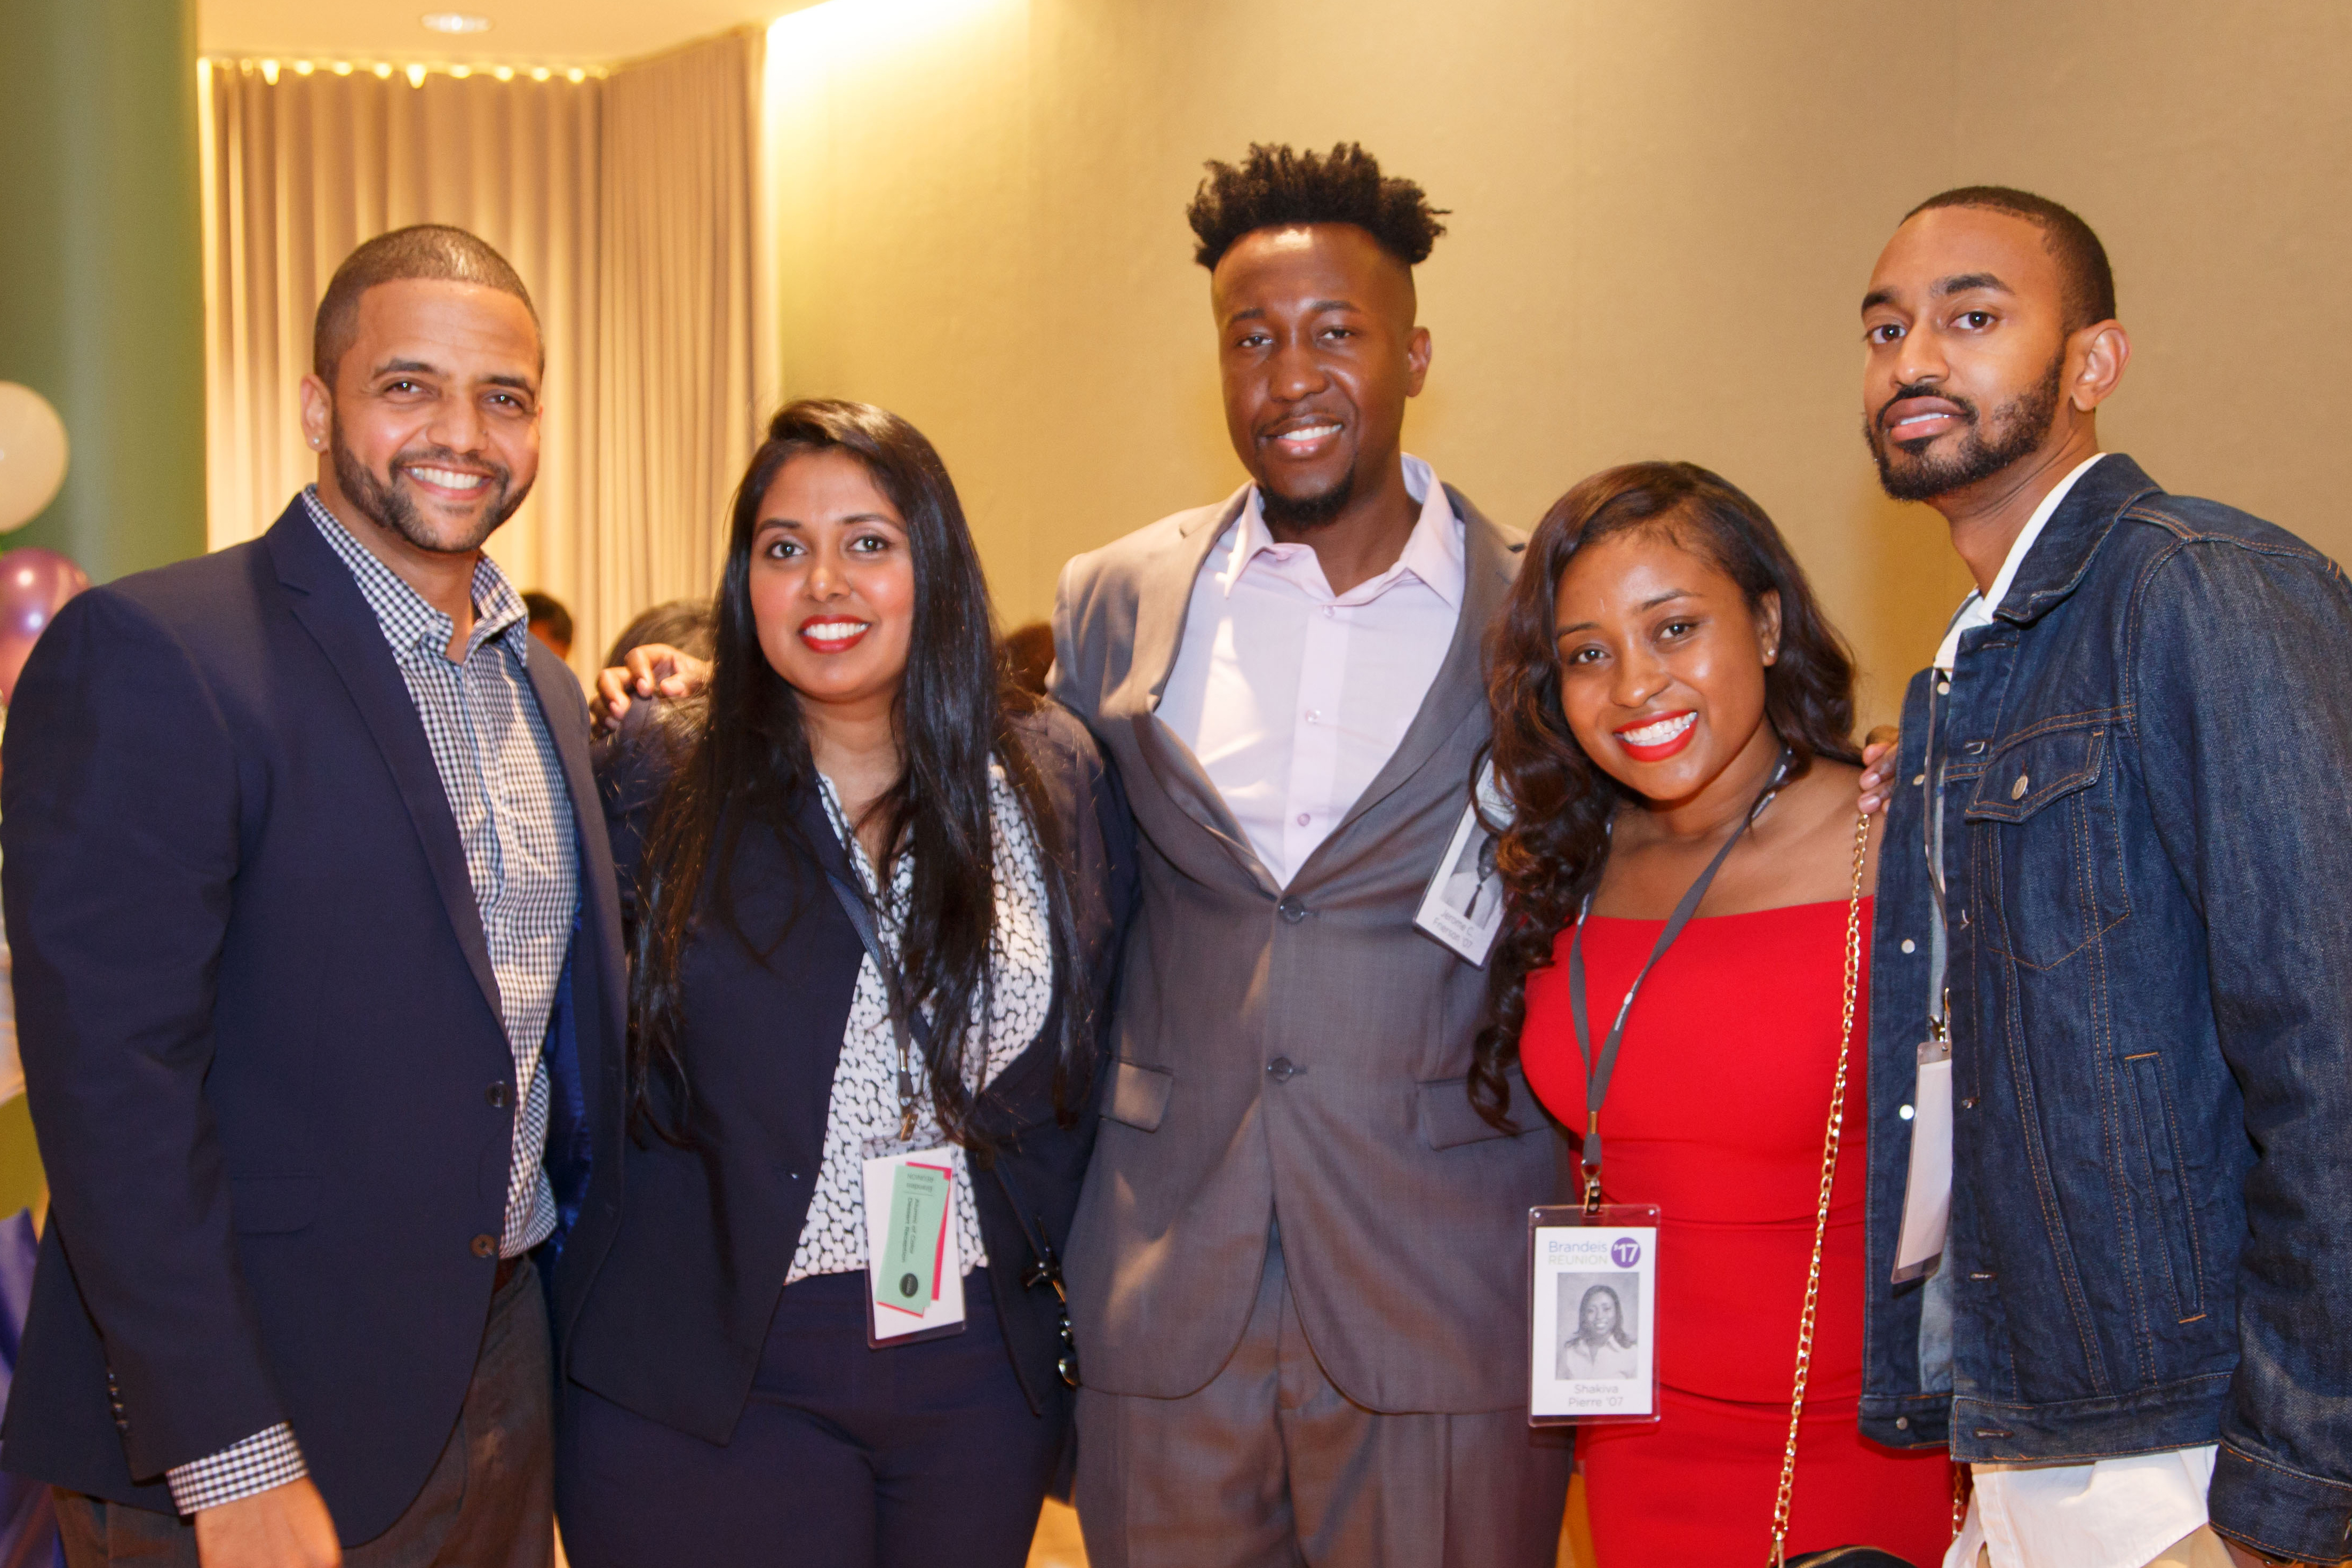 Alumni of Color Network Alumni gathered at the AOC Reunion in 2017